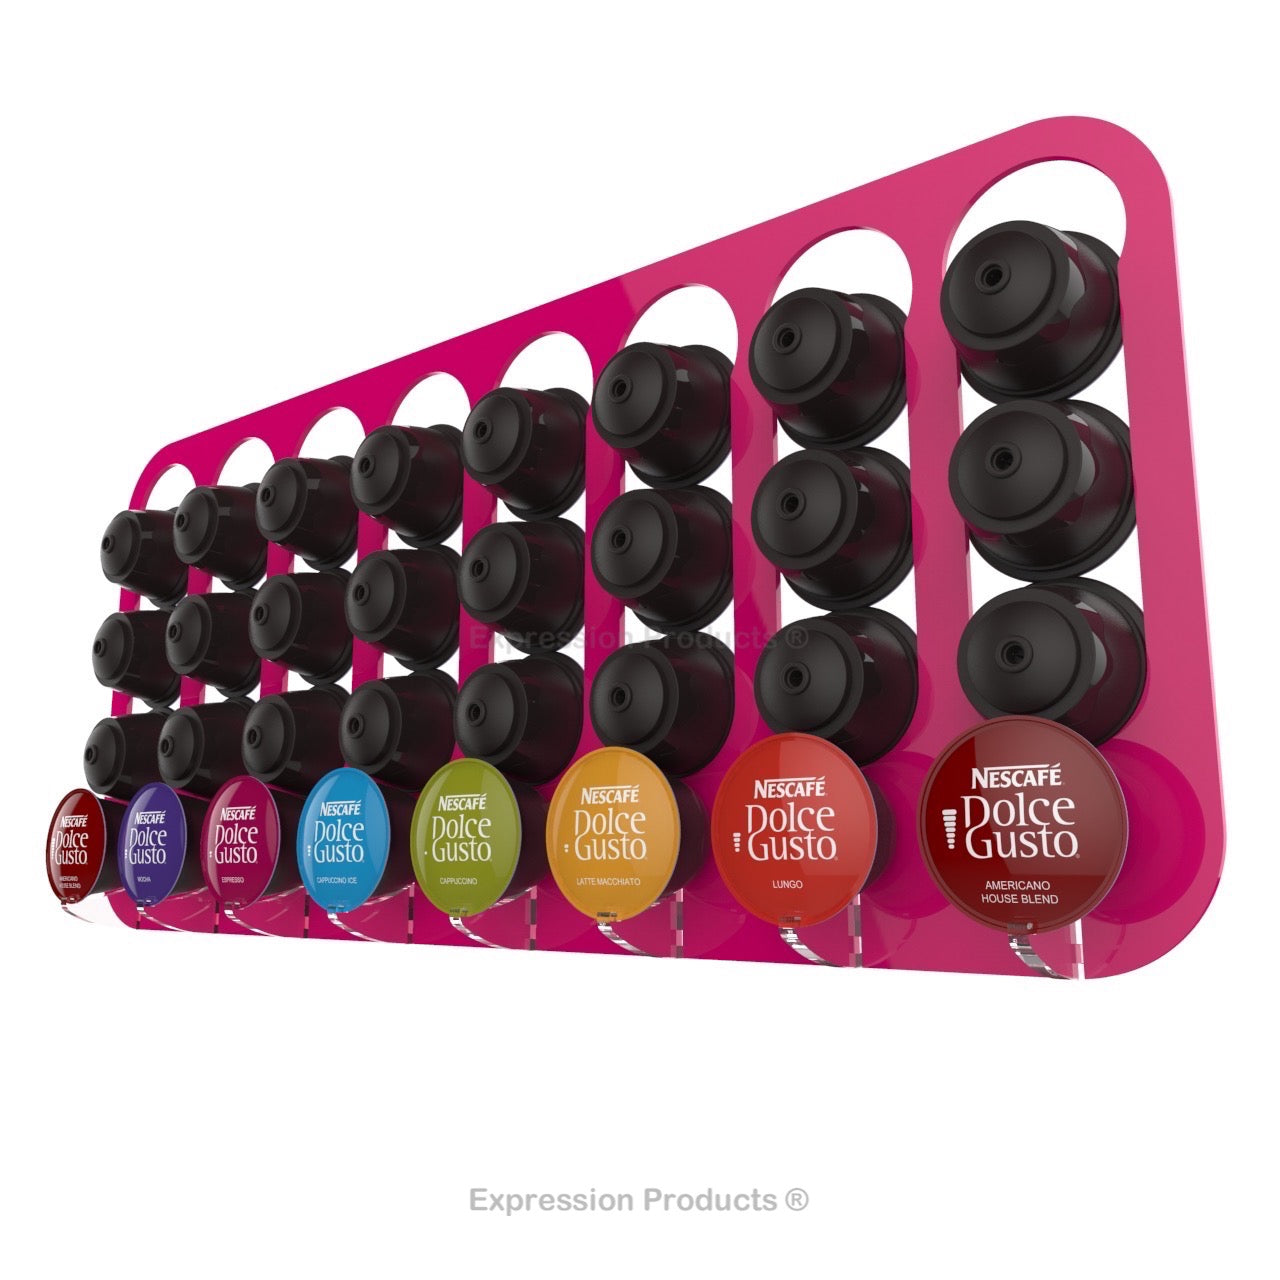 Dolce gusto coffee pod holder, wall mounted, half height.  Shown in pink holding 32 pods